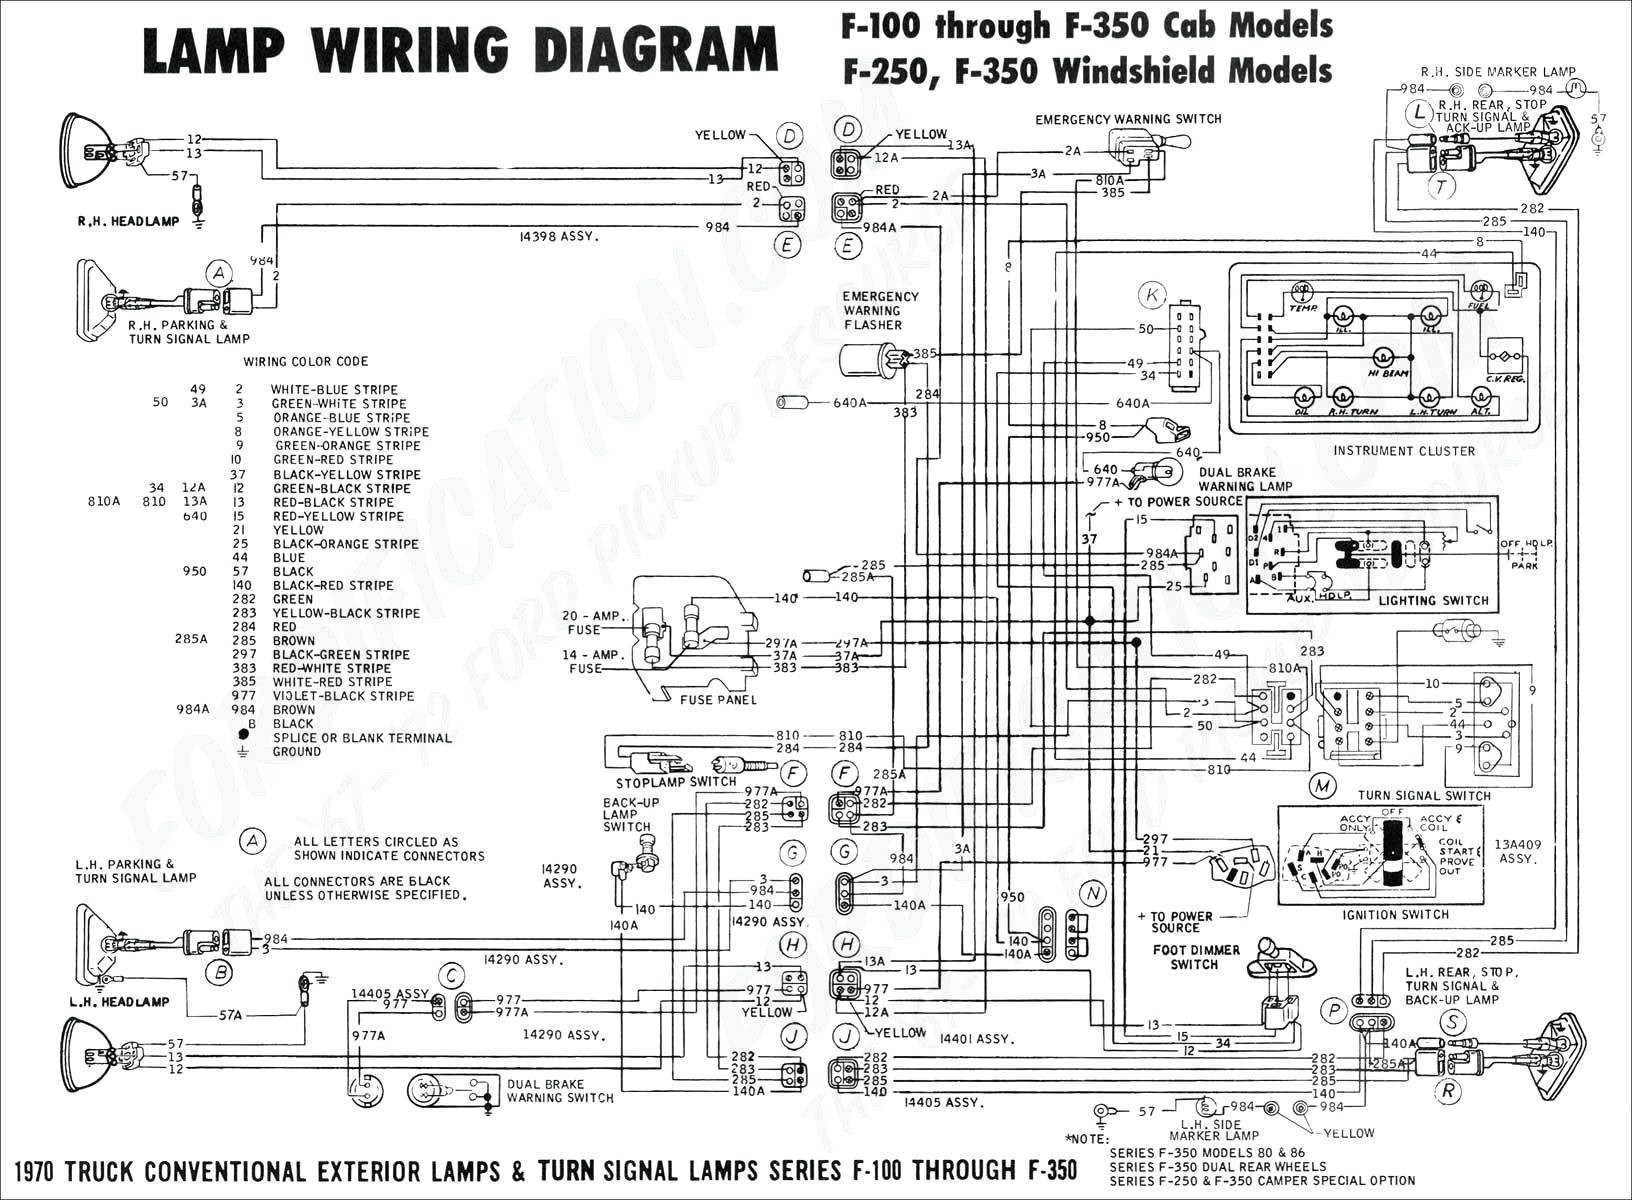 20 Hp Briggs and Stratton Engine Diagram Briggs and Stratton Ignition System Diagram Worksheet and Wiring Of 20 Hp Briggs and Stratton Engine Diagram